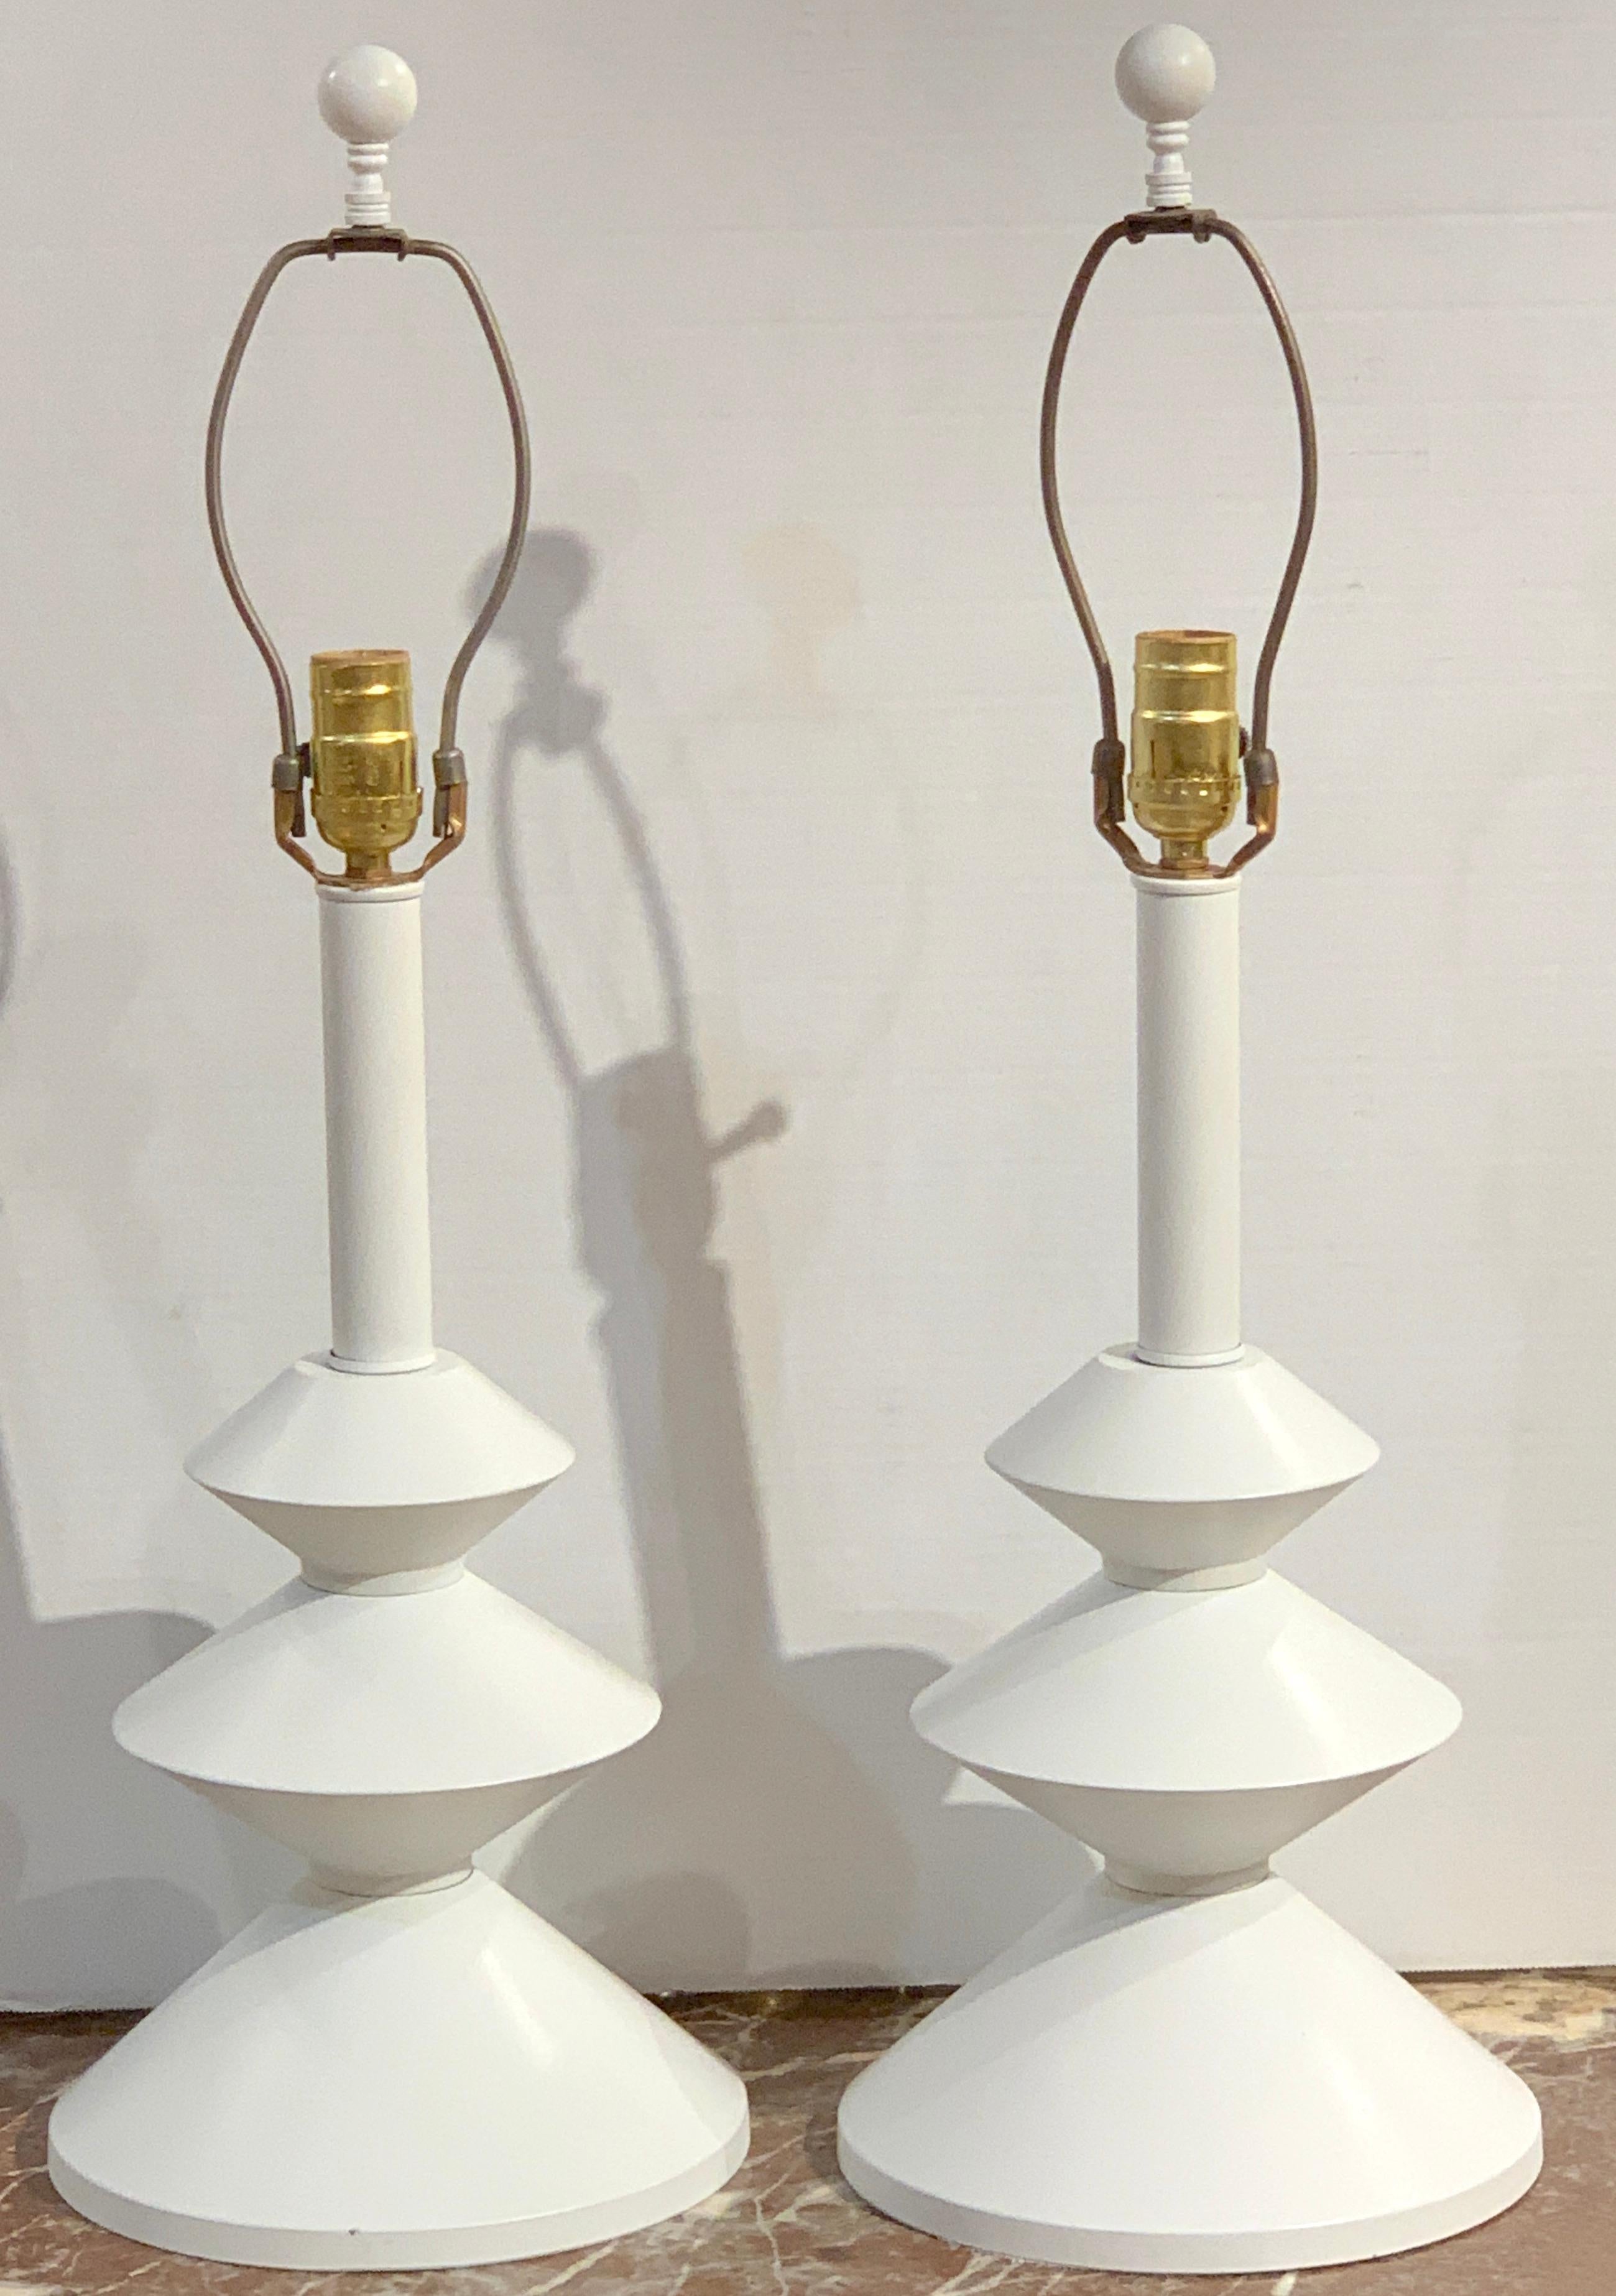 Pair of after, Alberto Giacometti style enameled metal sculptural lamps, a fine vintage pair in enameled metal, the lamps with the harps and finial measure 27-Inches high. The lamps stand 20-Inches high to the top of the socket, 17-inches high to